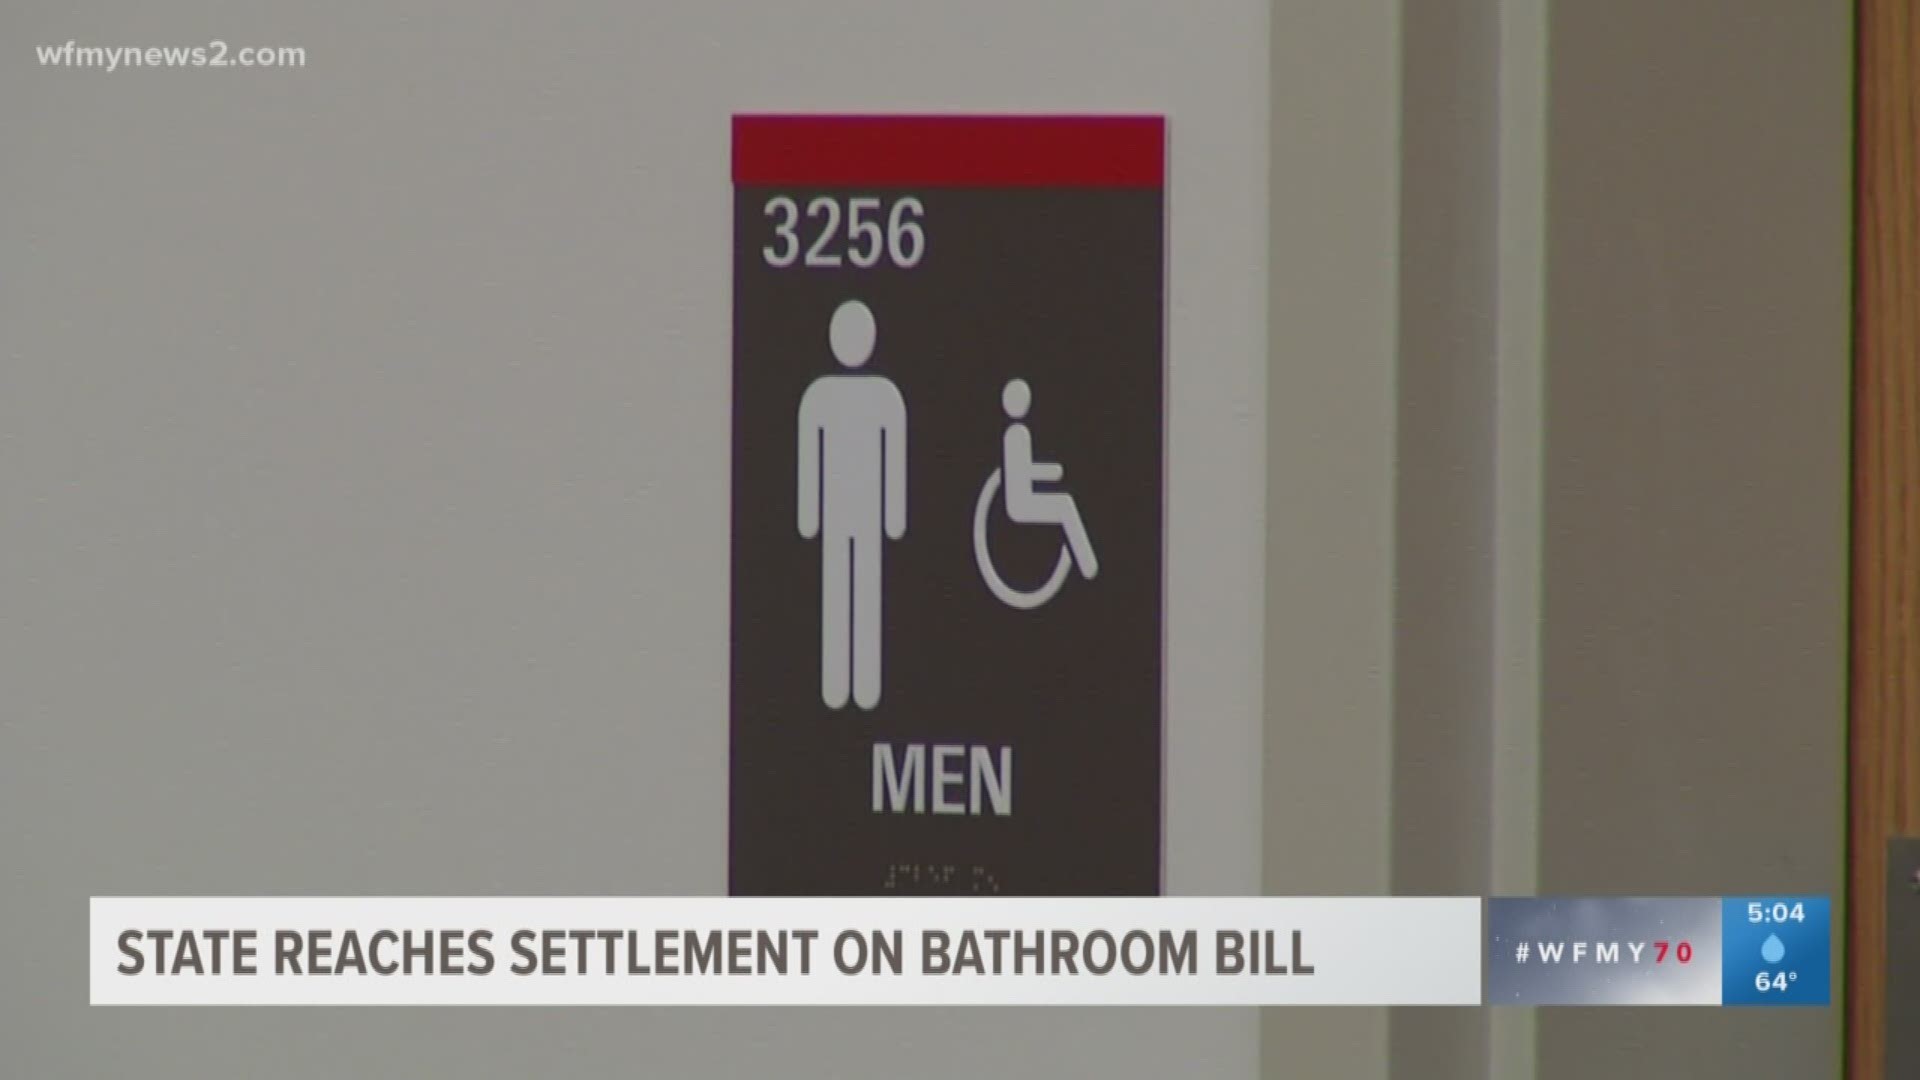 A federal judge approved a legal settlement Tuesday affirming transgender people's right to use restrooms matching their gender identity in many North Carolina public buildings.